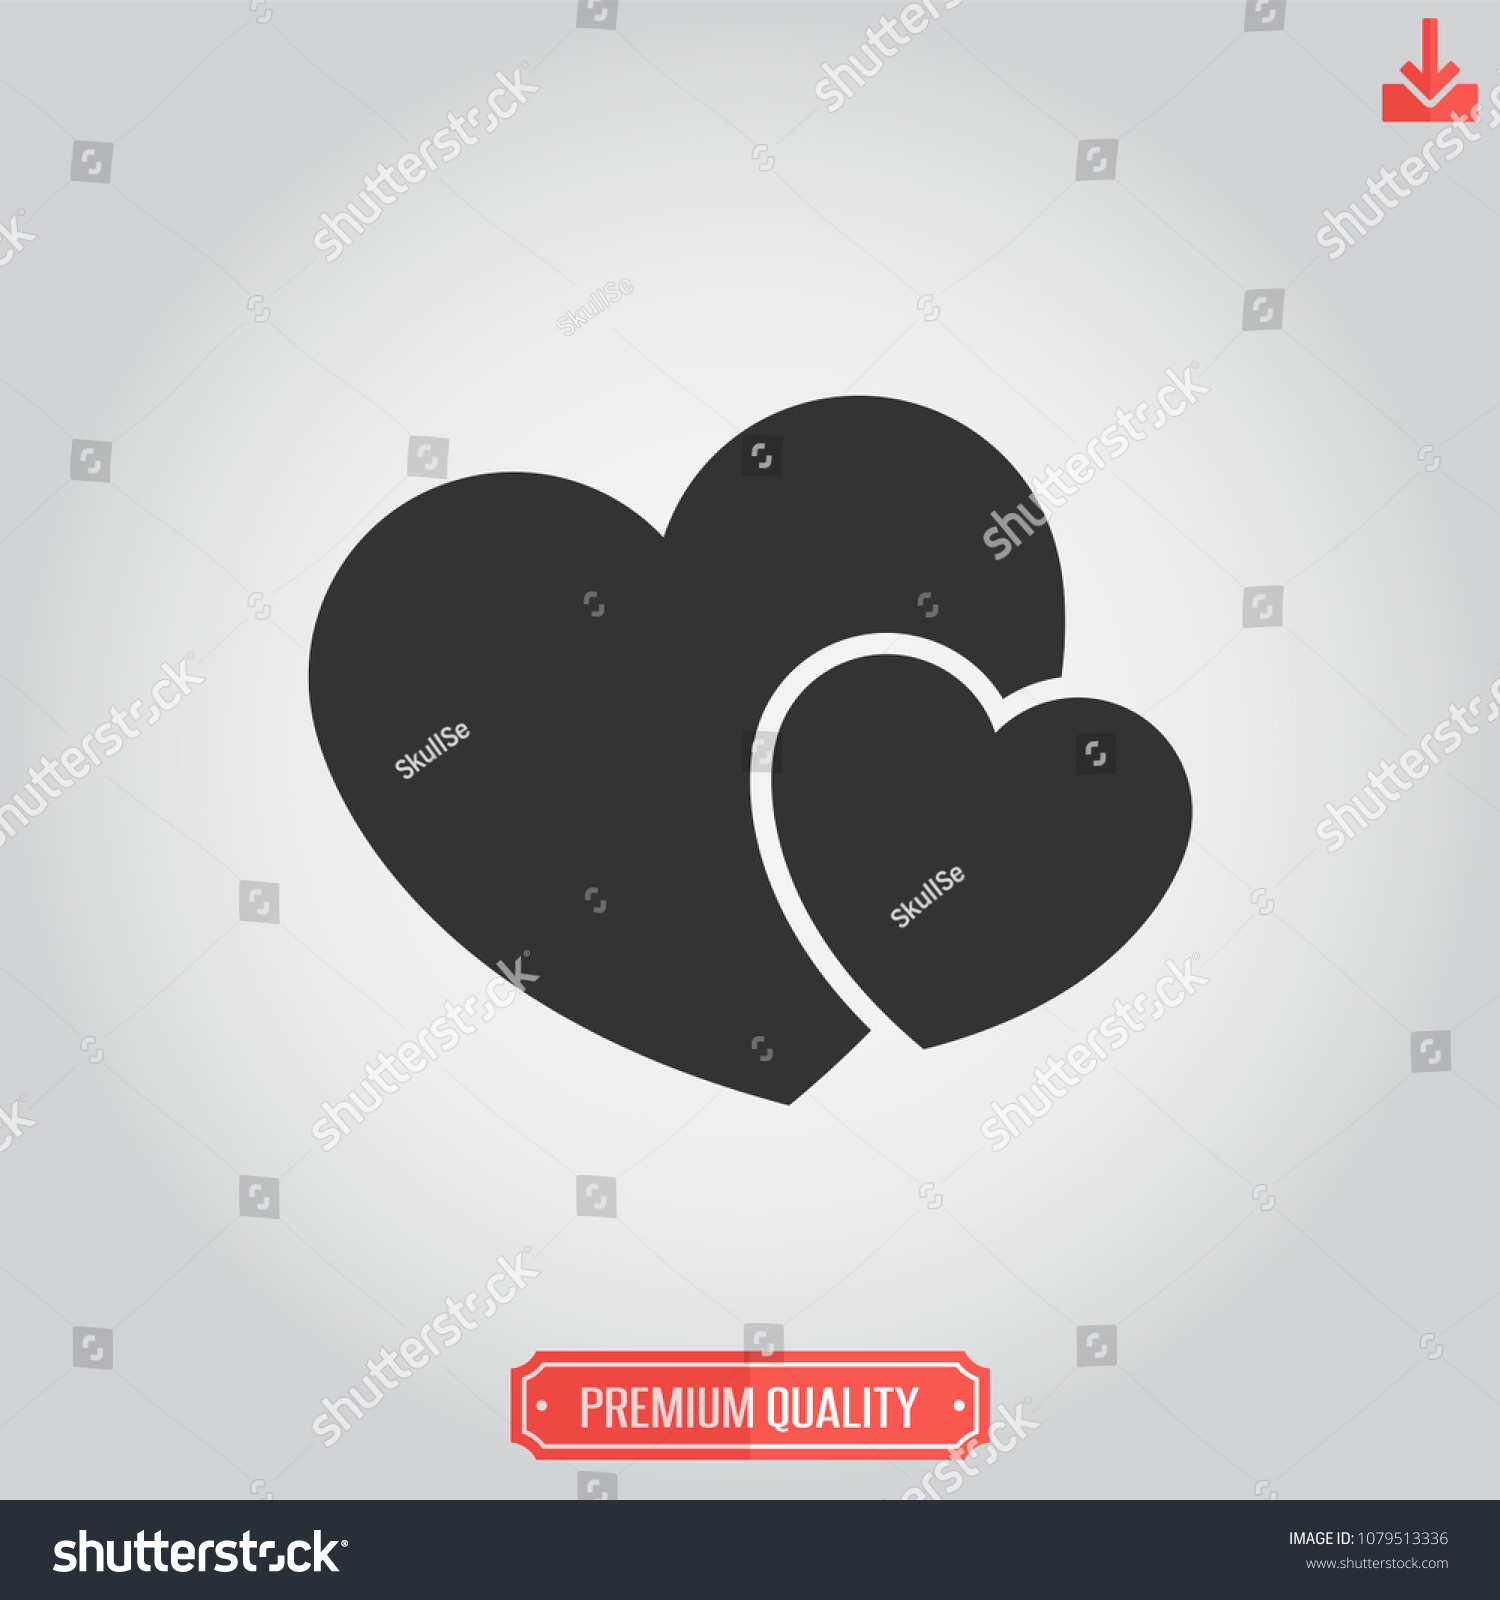 SVG of Heart icon,love vector,romantic sign isolated on grey background,simple double heart  illustration for graphic design, web and mobile platforms. svg